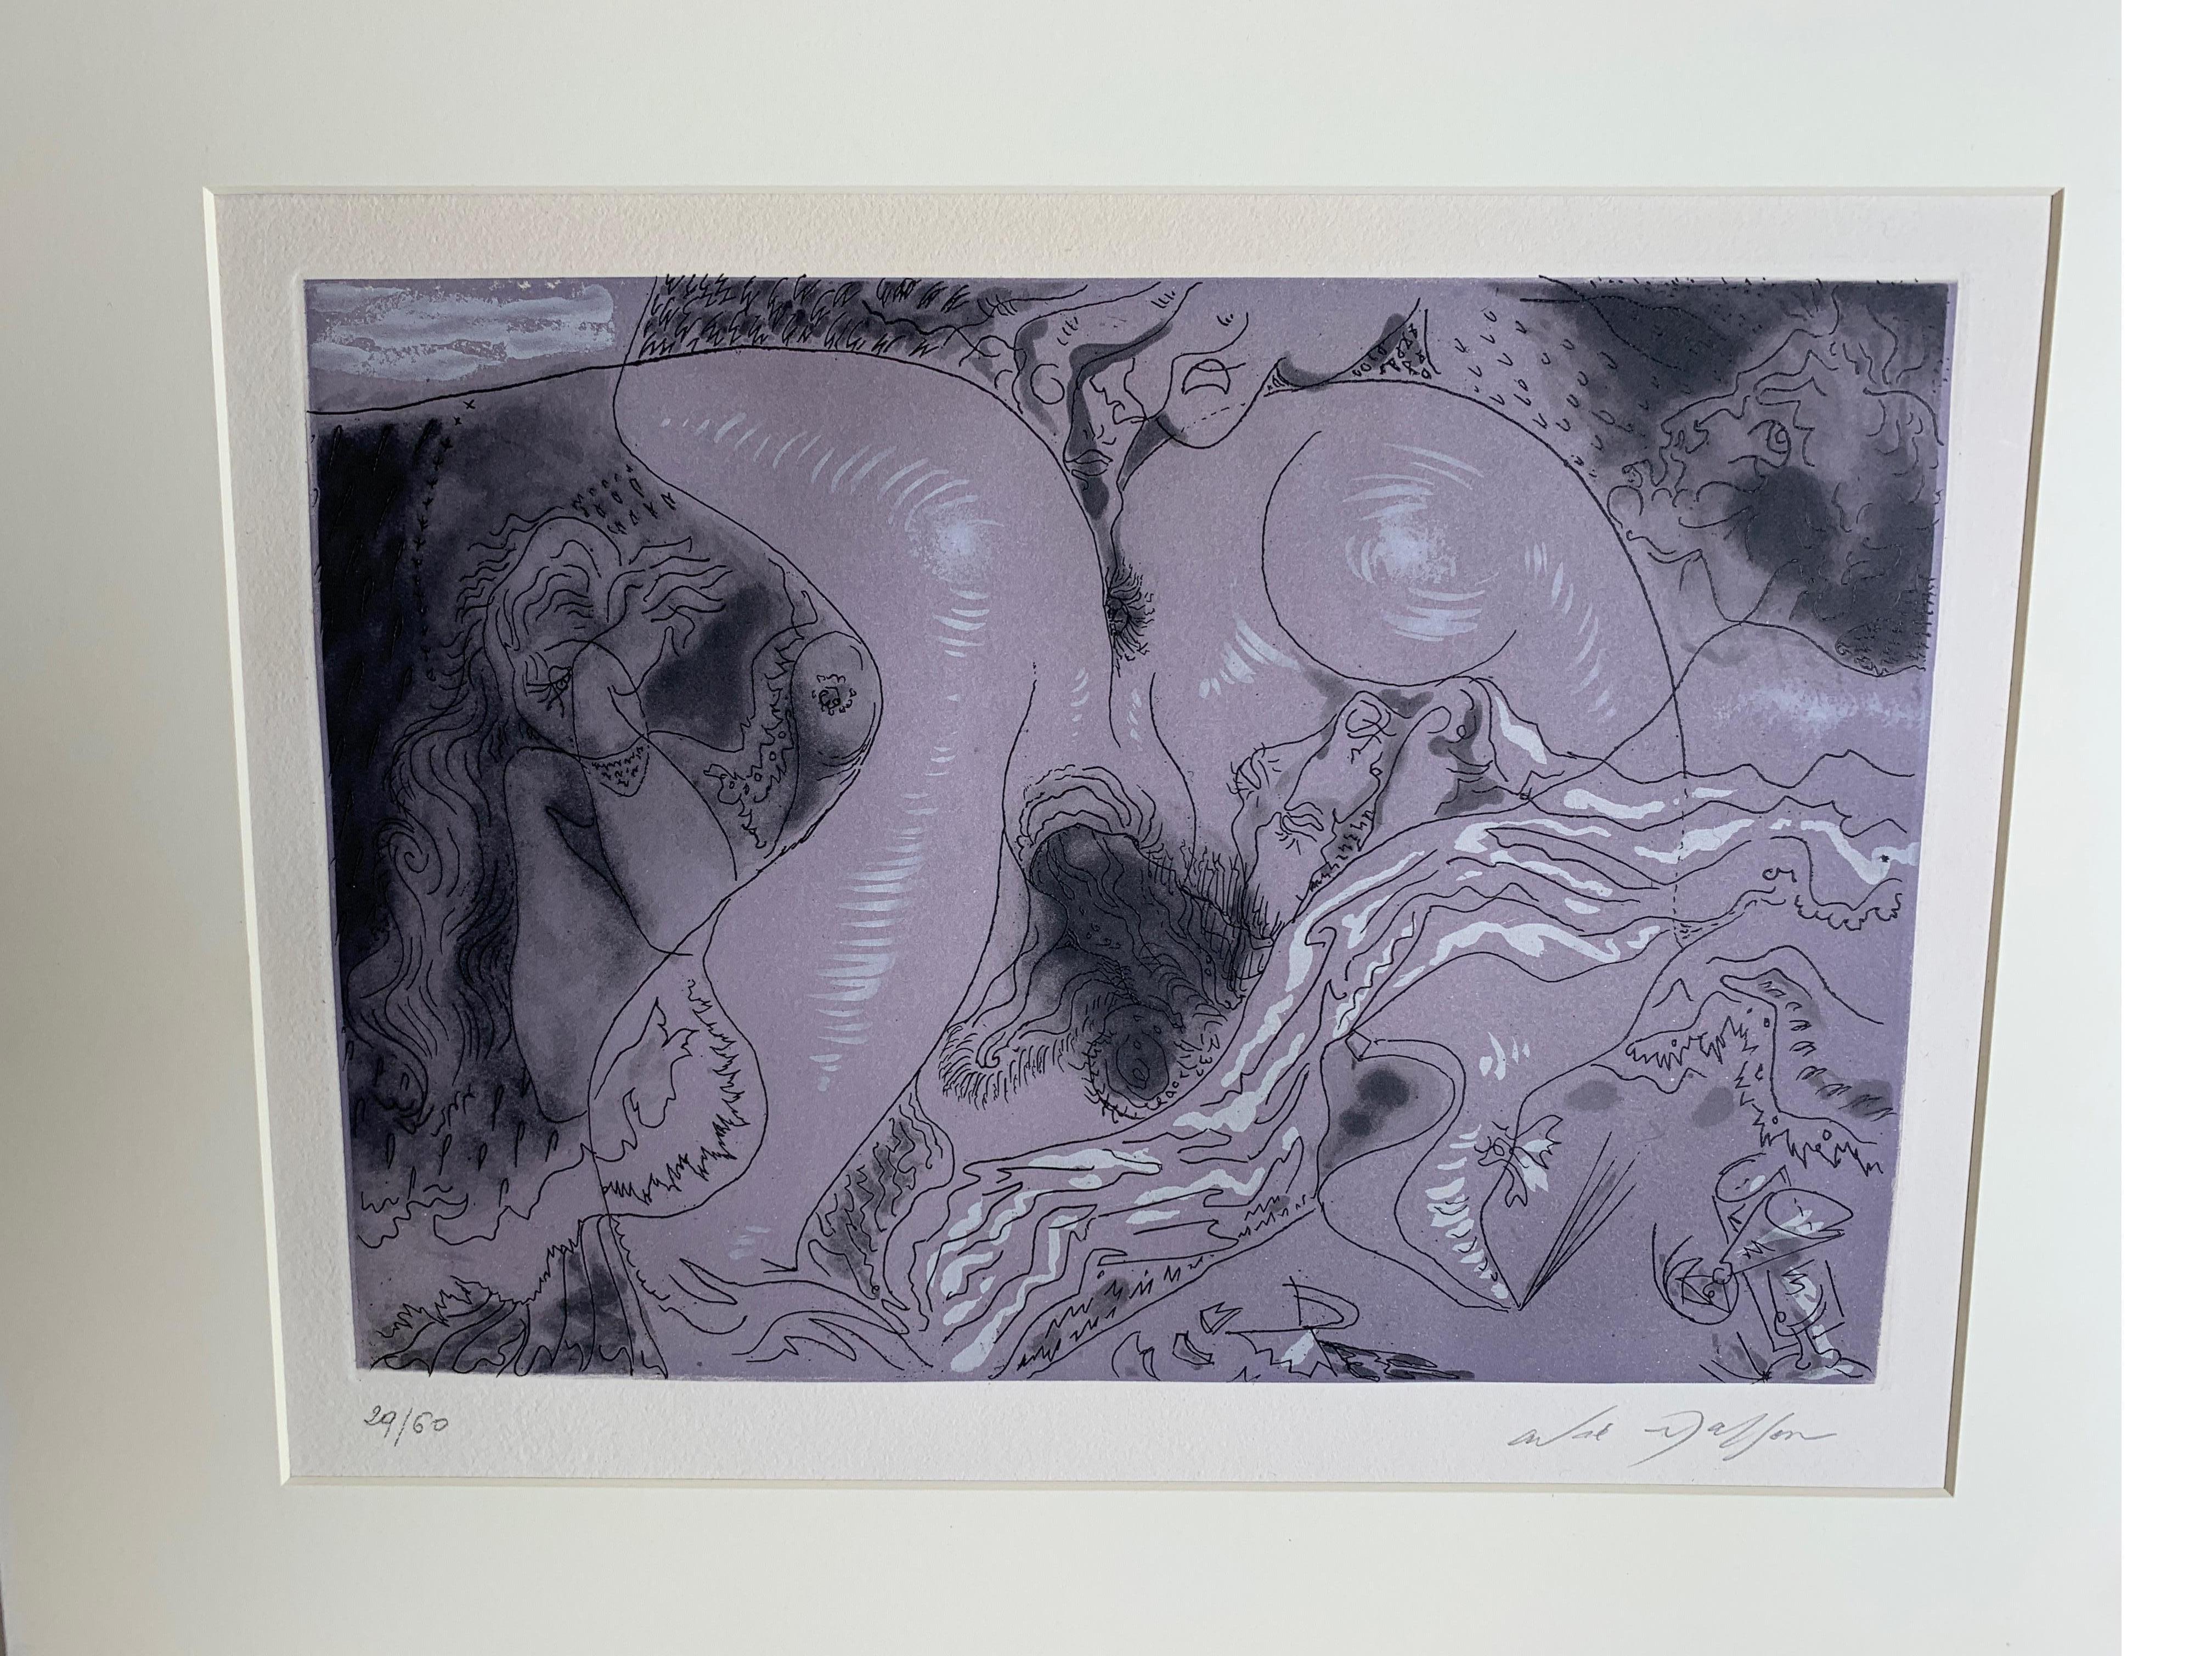 Series of Nine Surrealist Erotic Lithographs by Andre Masson, Signed / Numbered 3